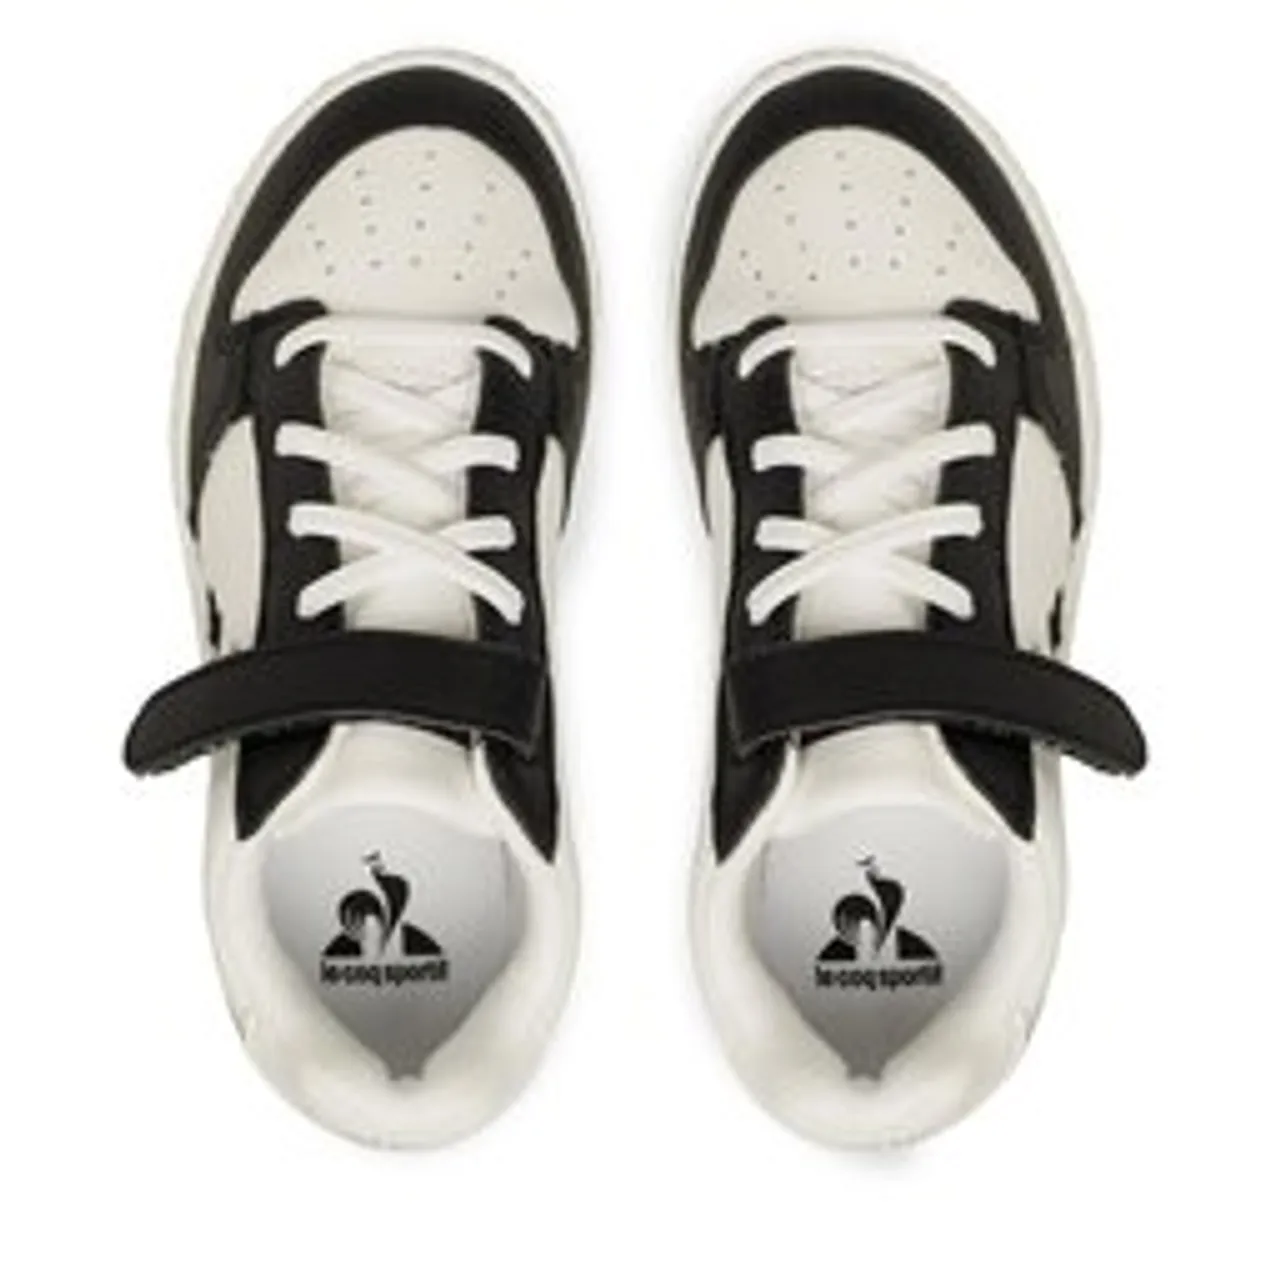 Sneakers Le Coq Sportif Breakpoint Ps Sport 2310254 Optical White/Black